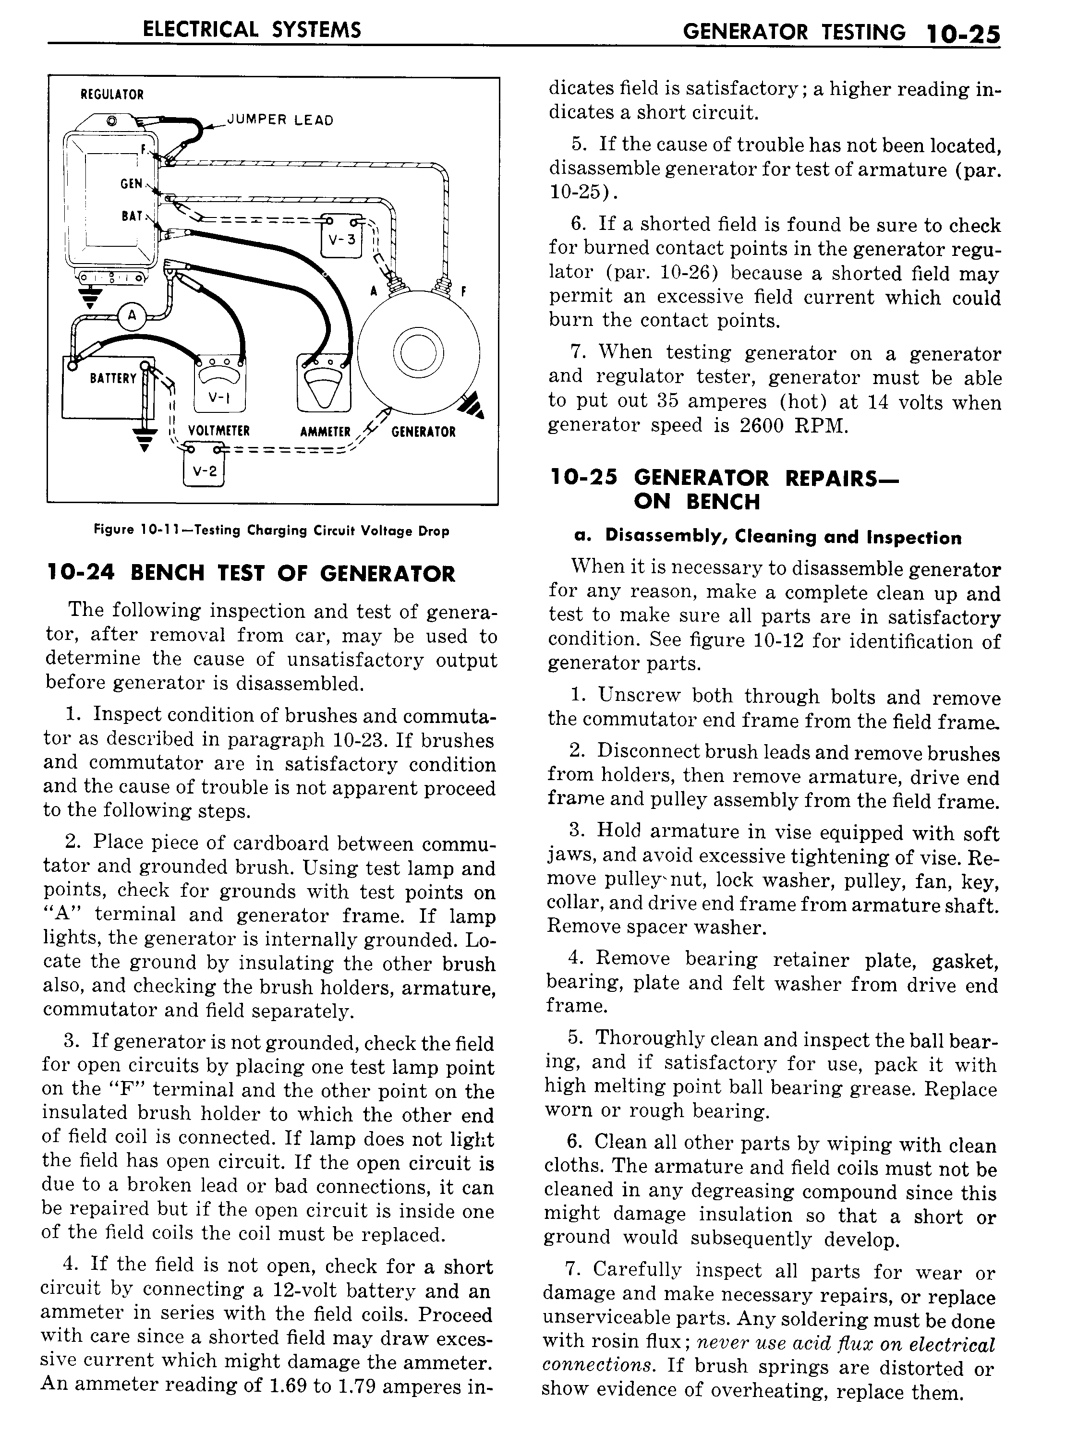 n_11 1957 Buick Shop Manual - Electrical Systems-025-025.jpg